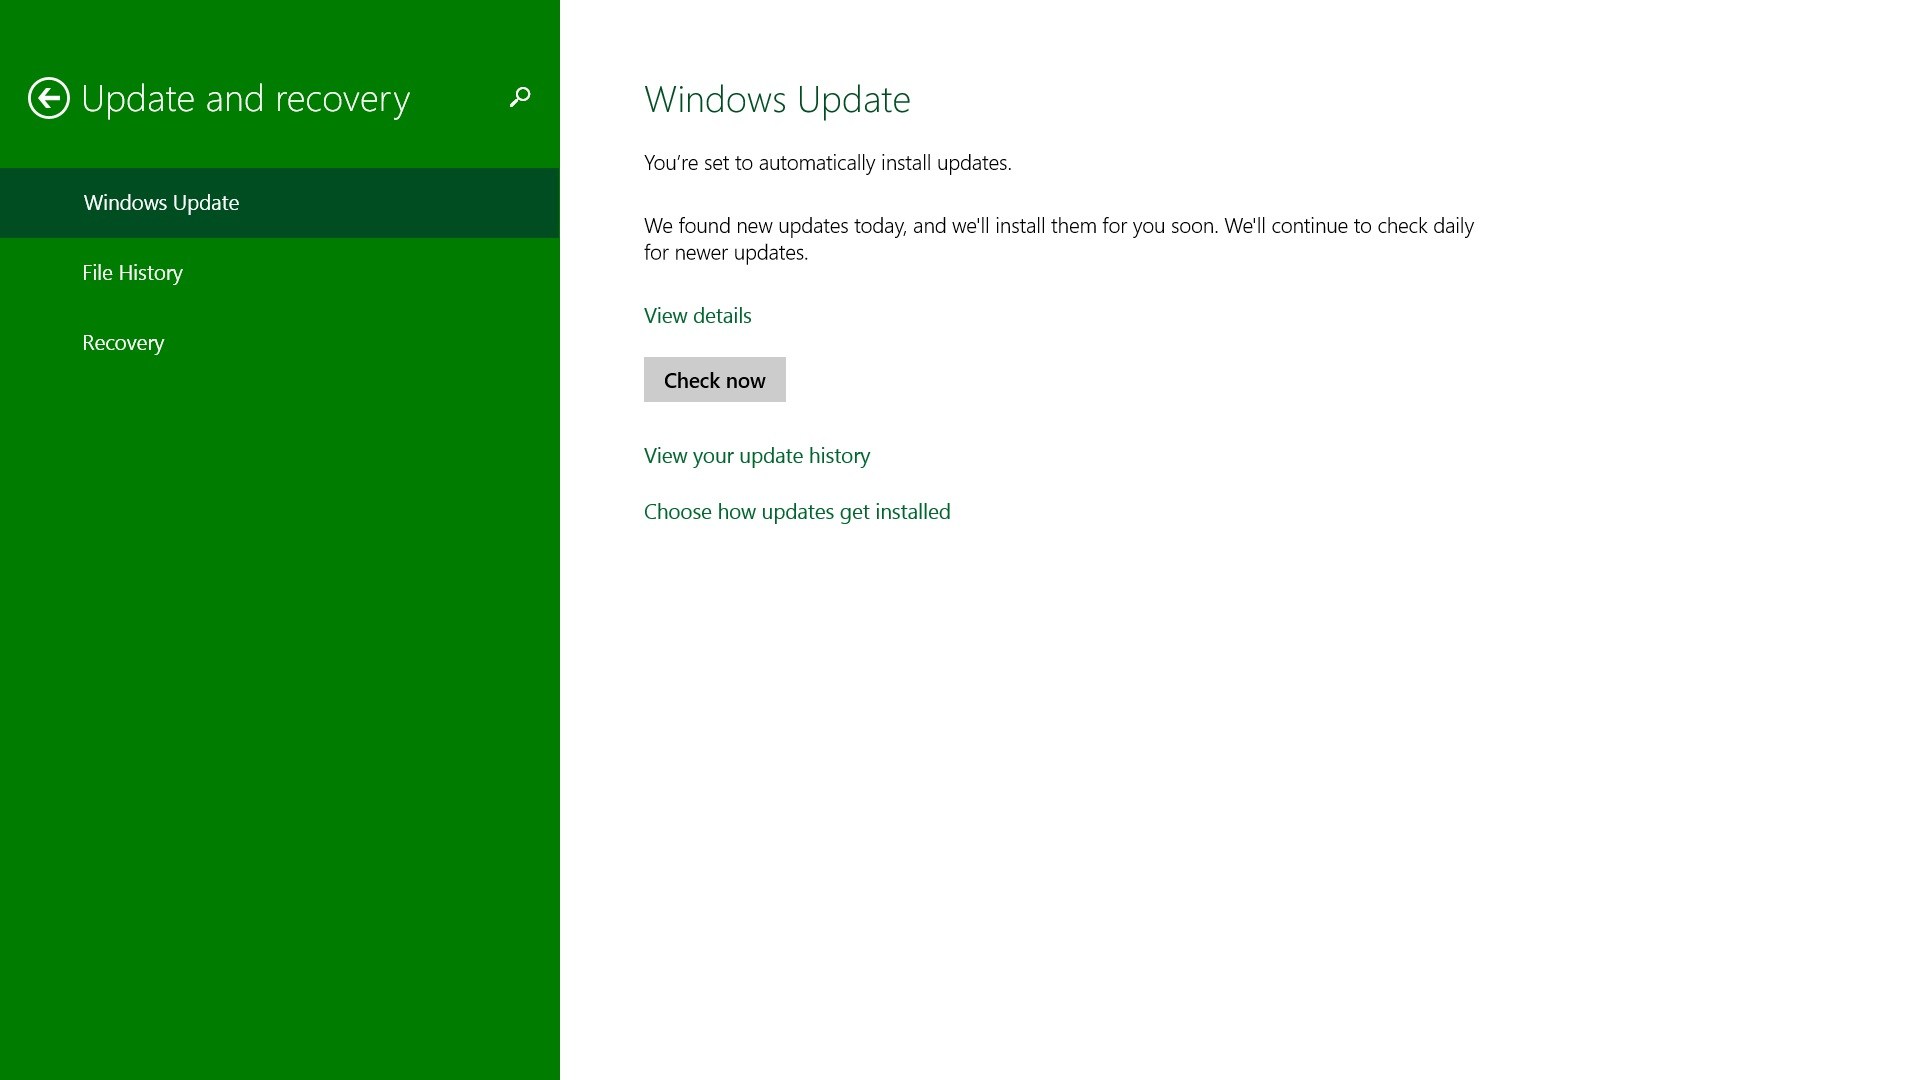 Windows 8 patches